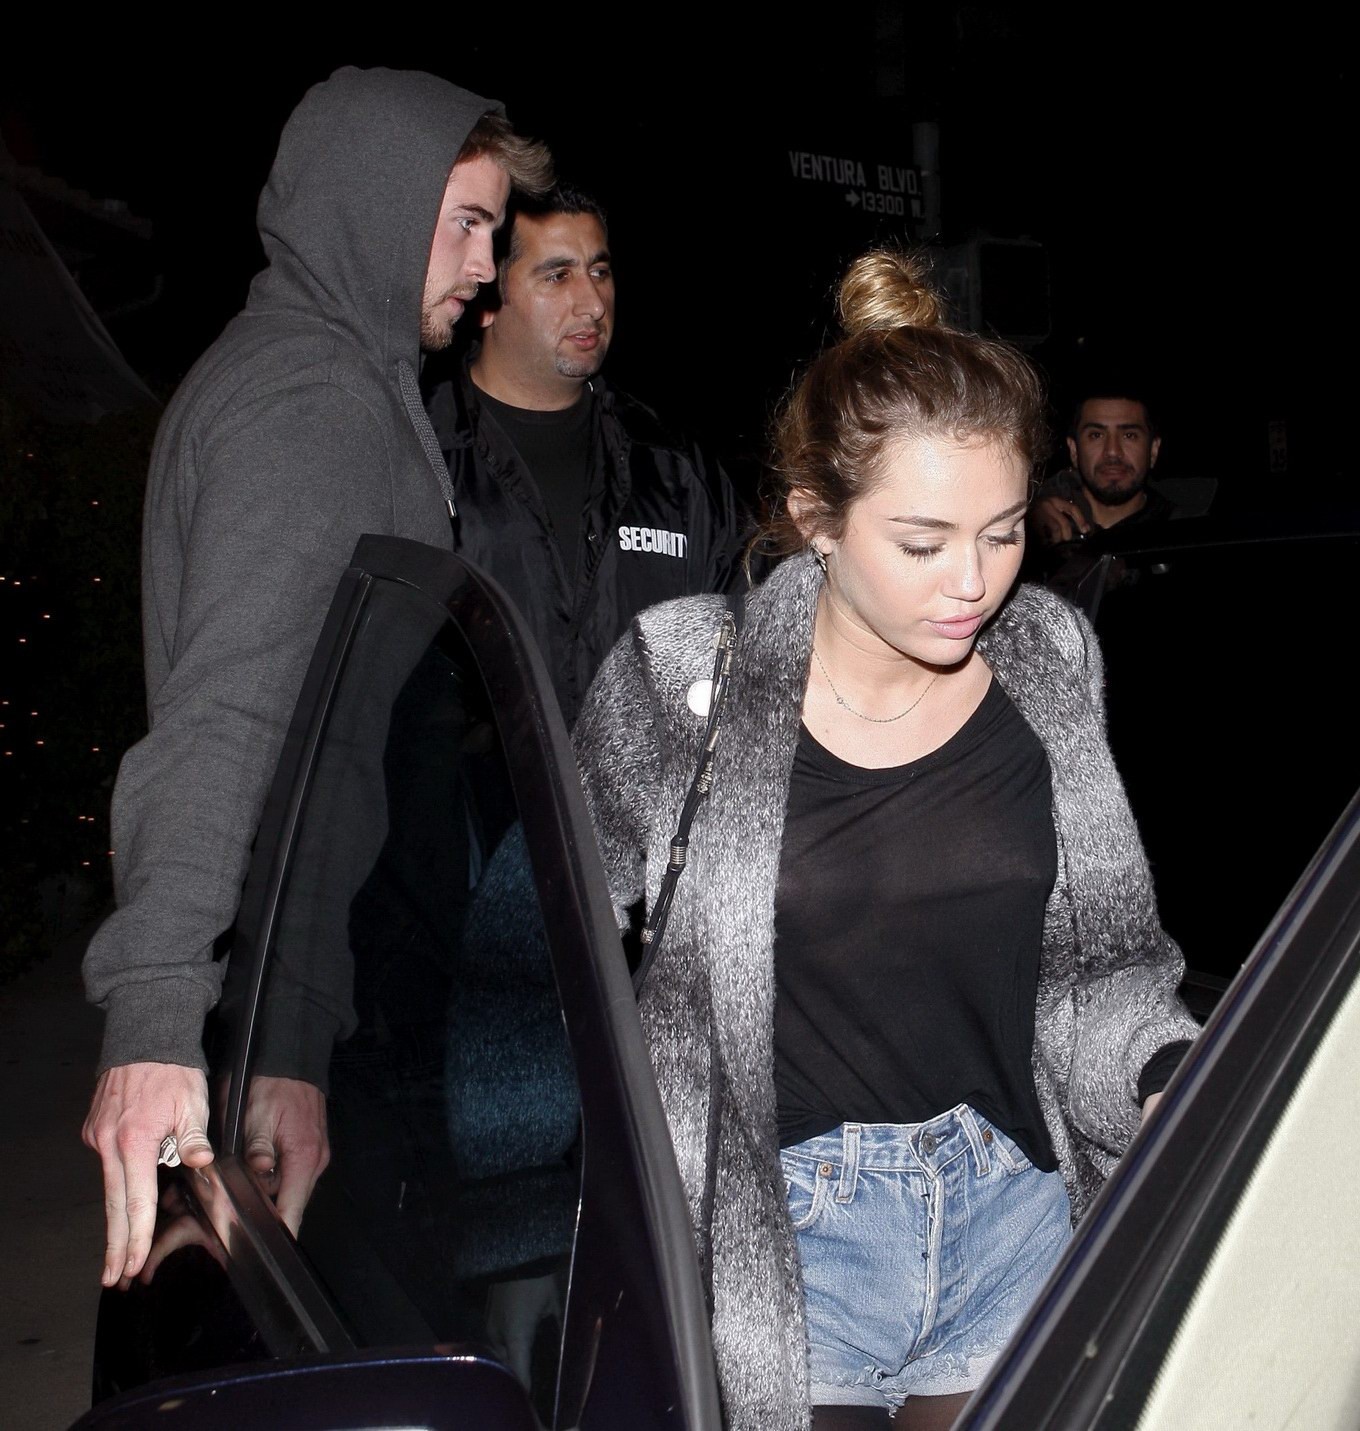 Miley Cyrus braless wearing black see through top outside a restaurant #75275446